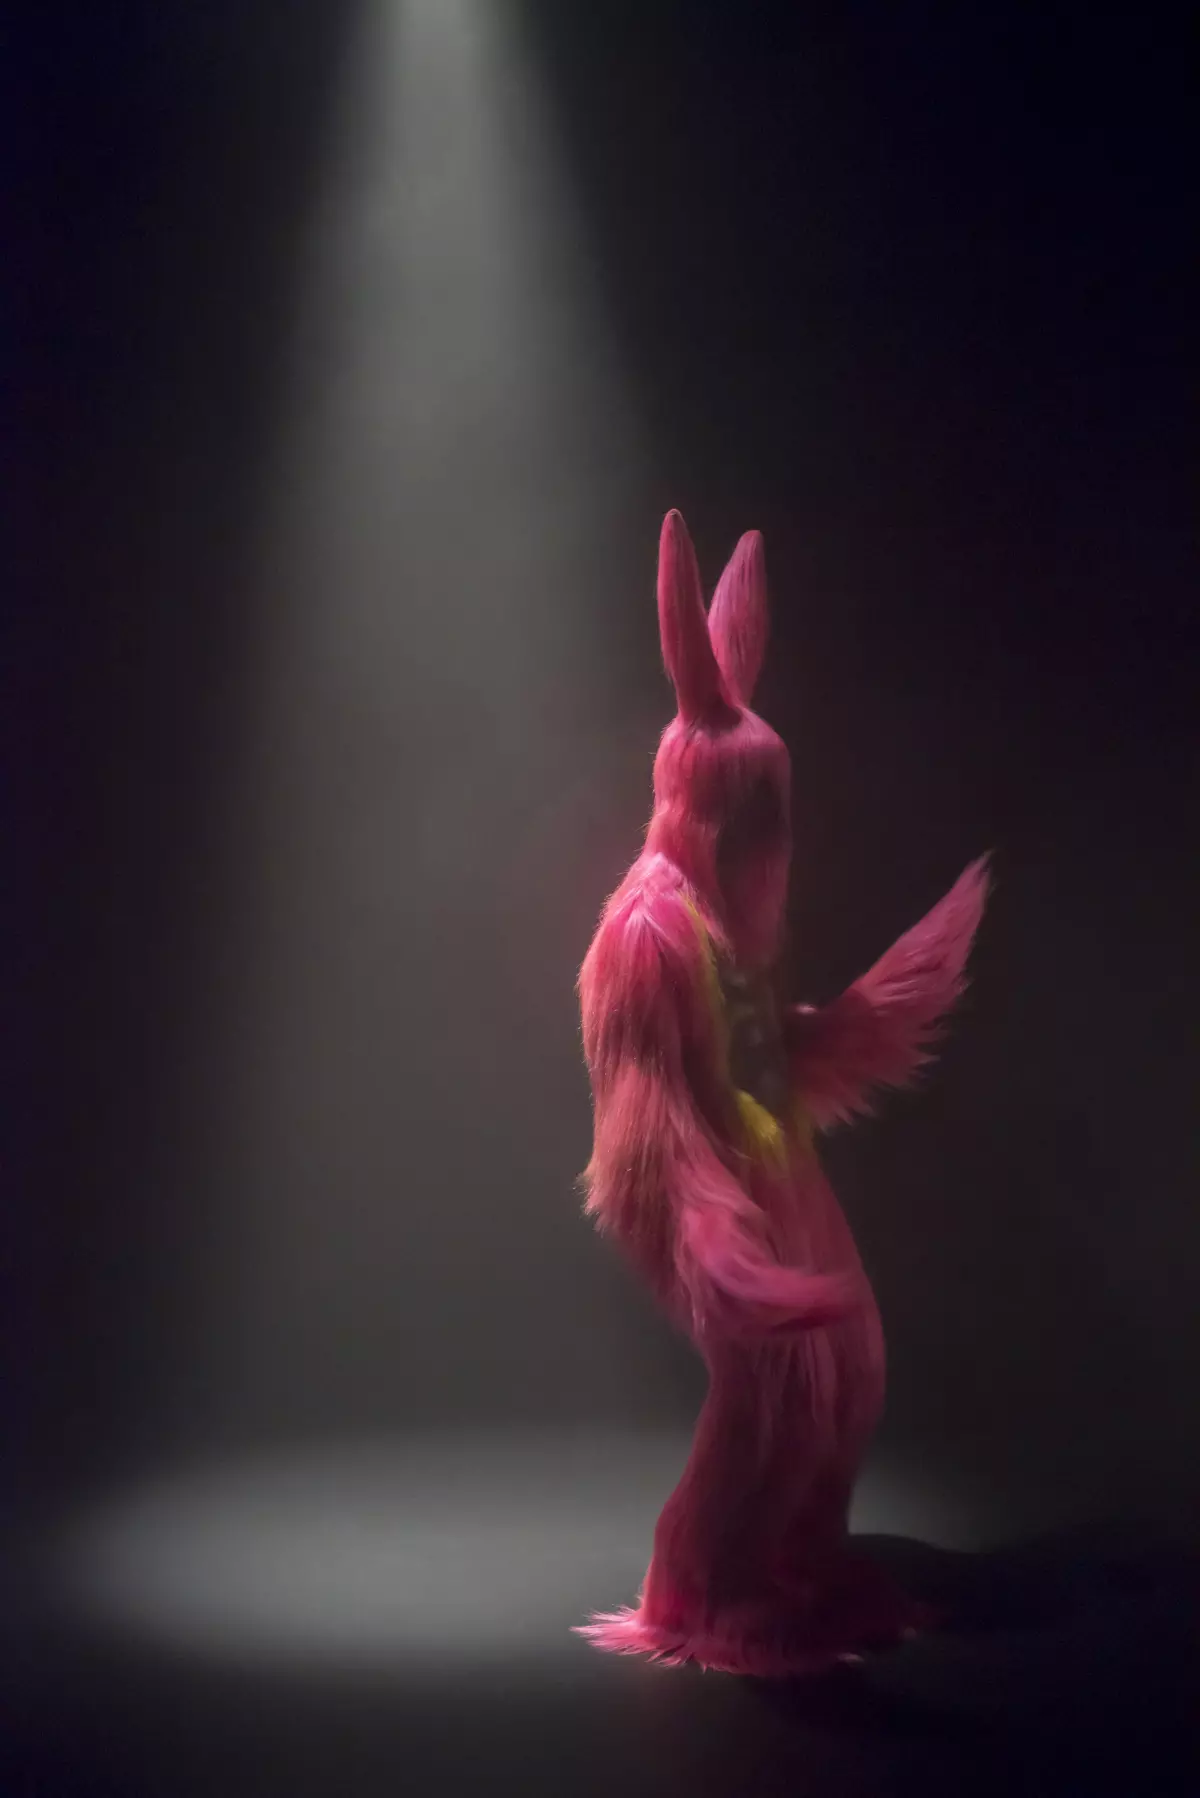 A performer on a dark hazy stage wears a shaggy pink costume resembling a bunny